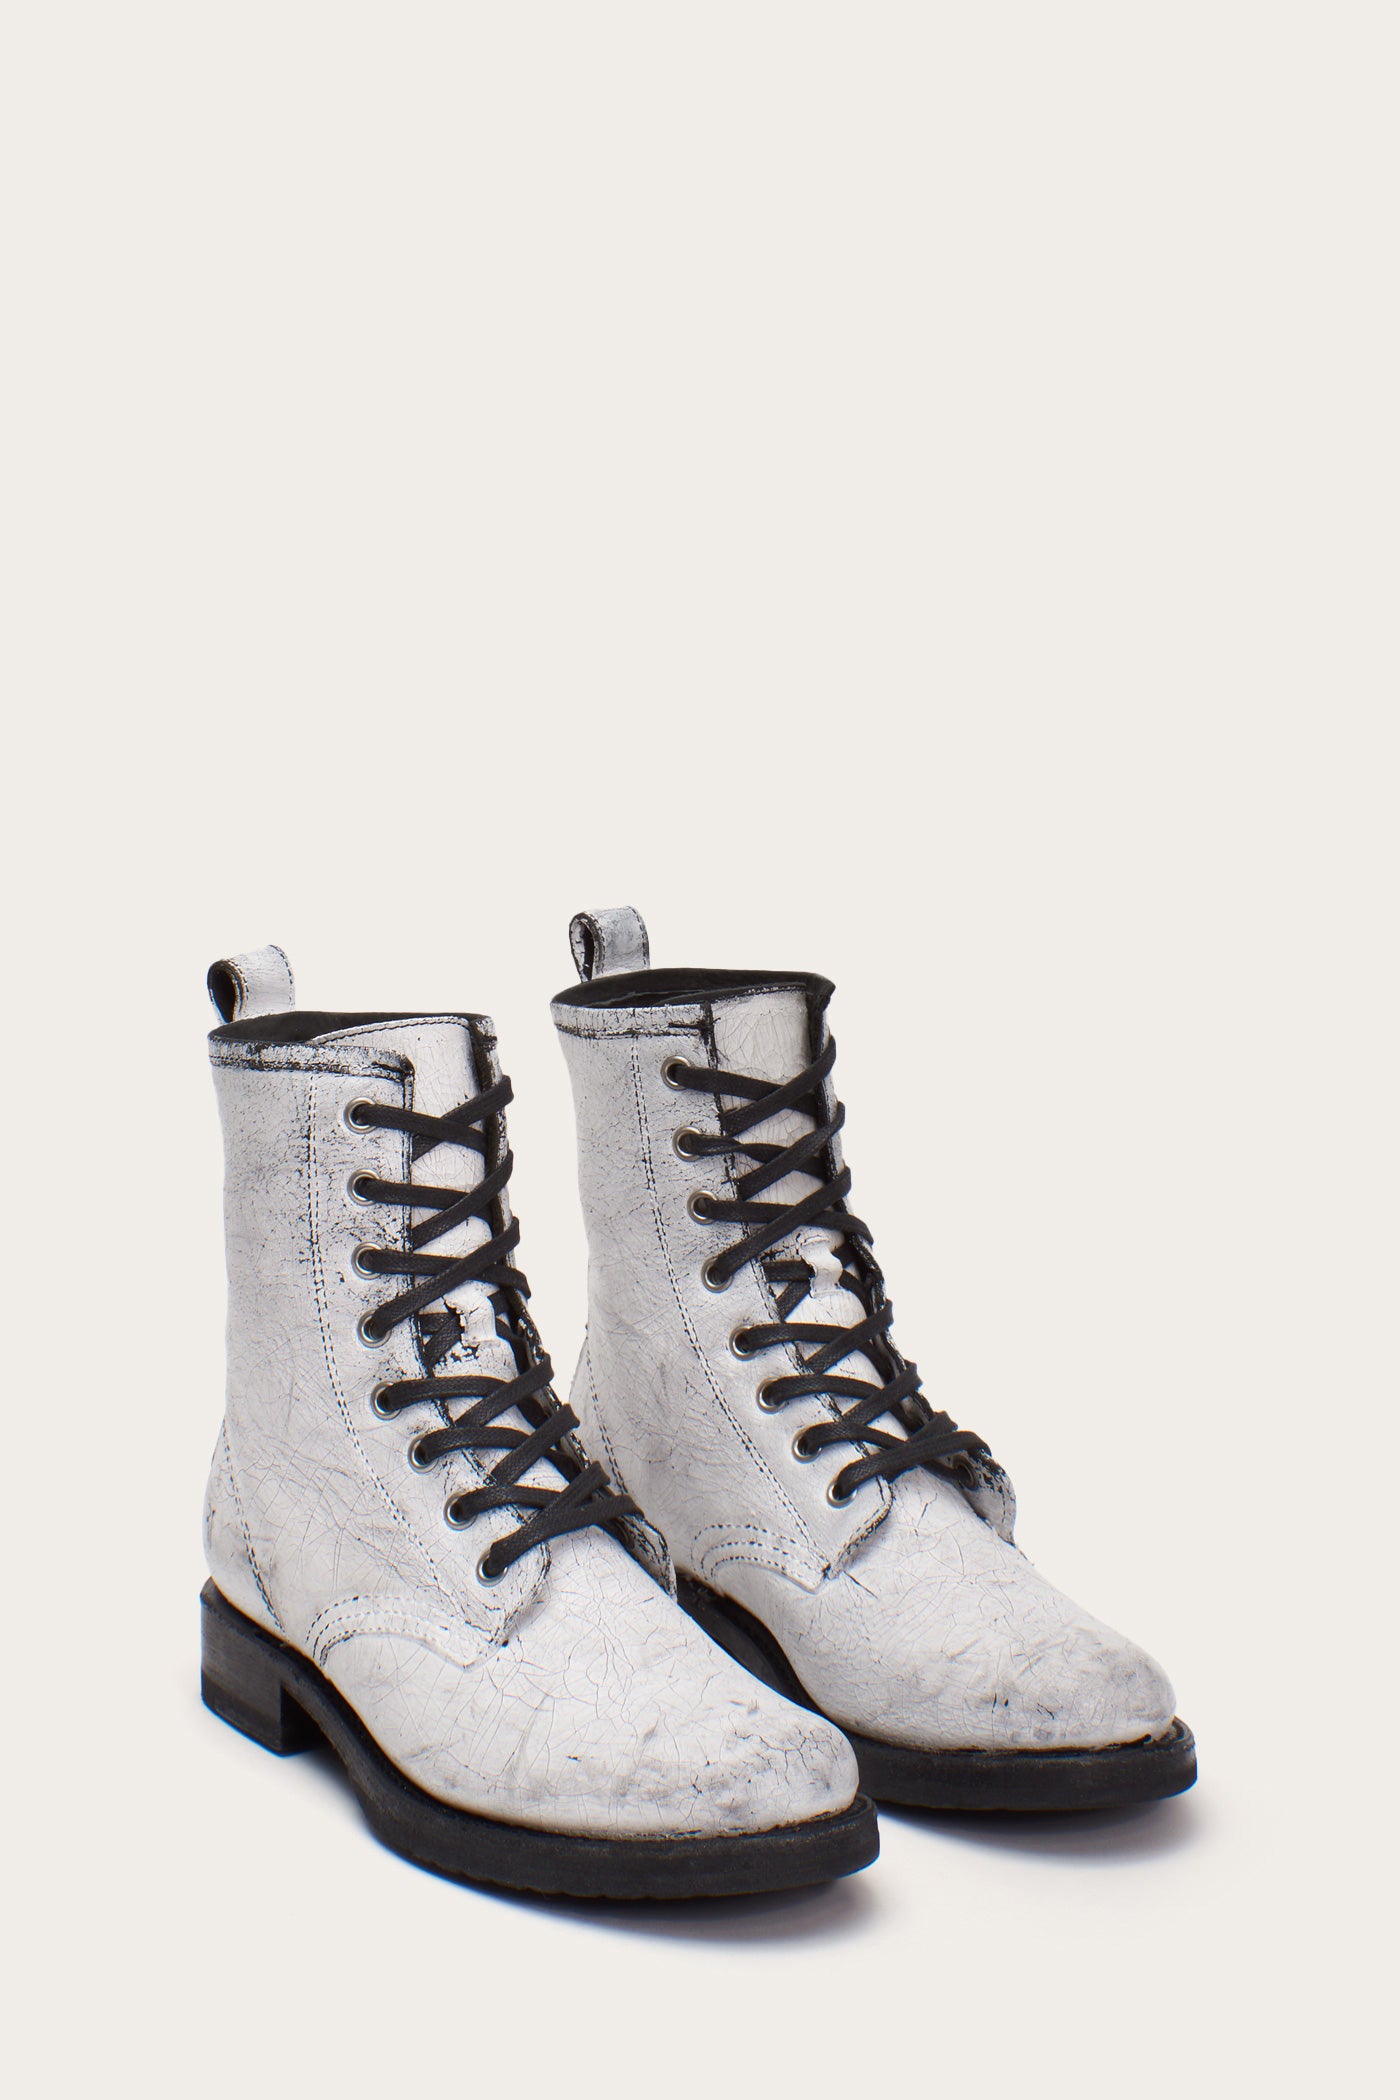 frye white combat boots